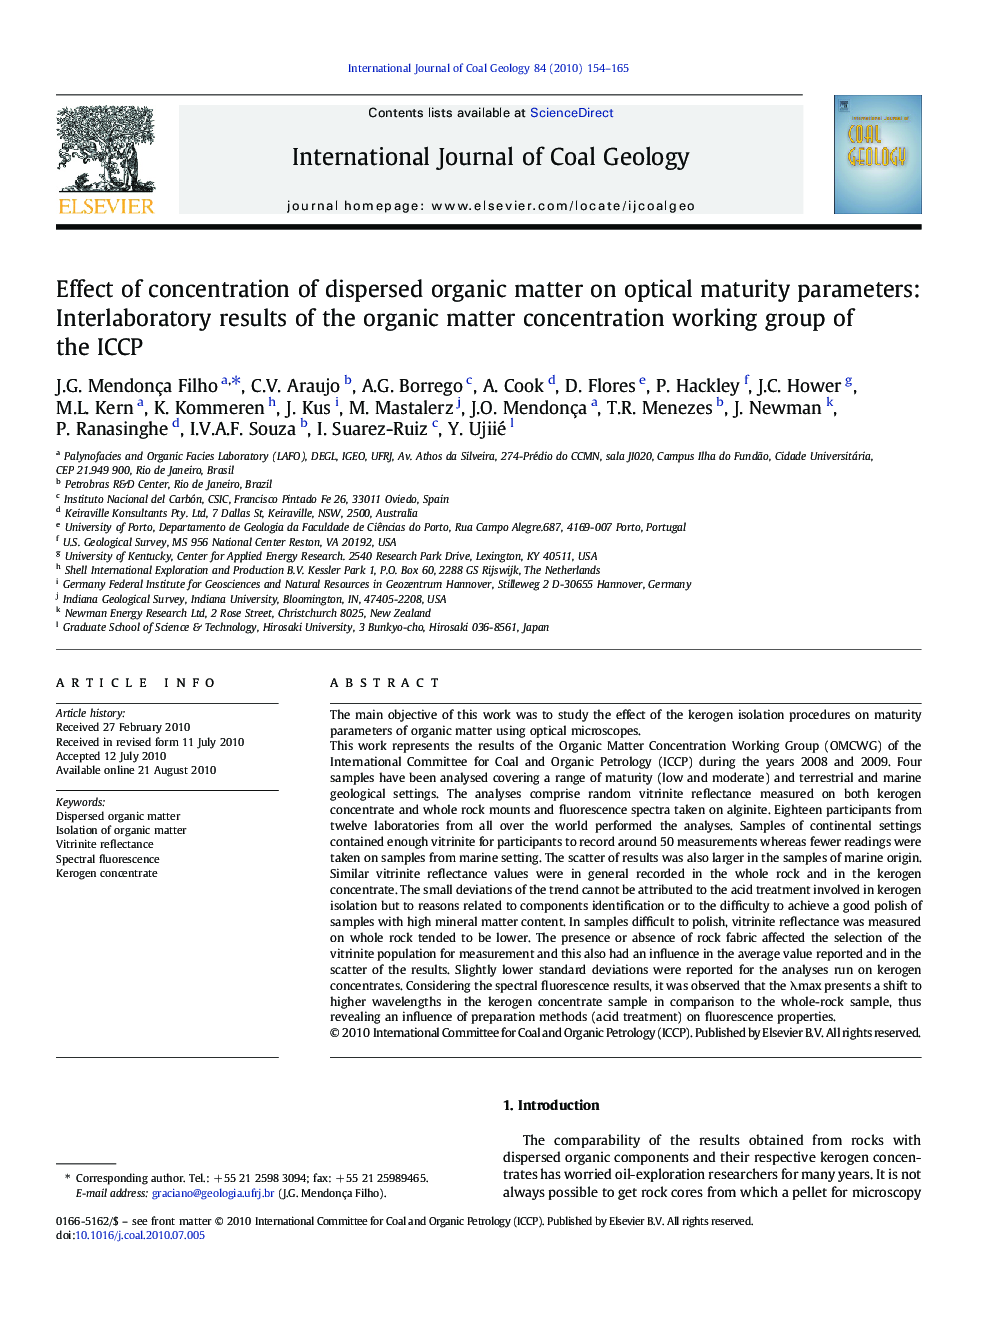 Effect of concentration of dispersed organic matter on optical maturity parameters: